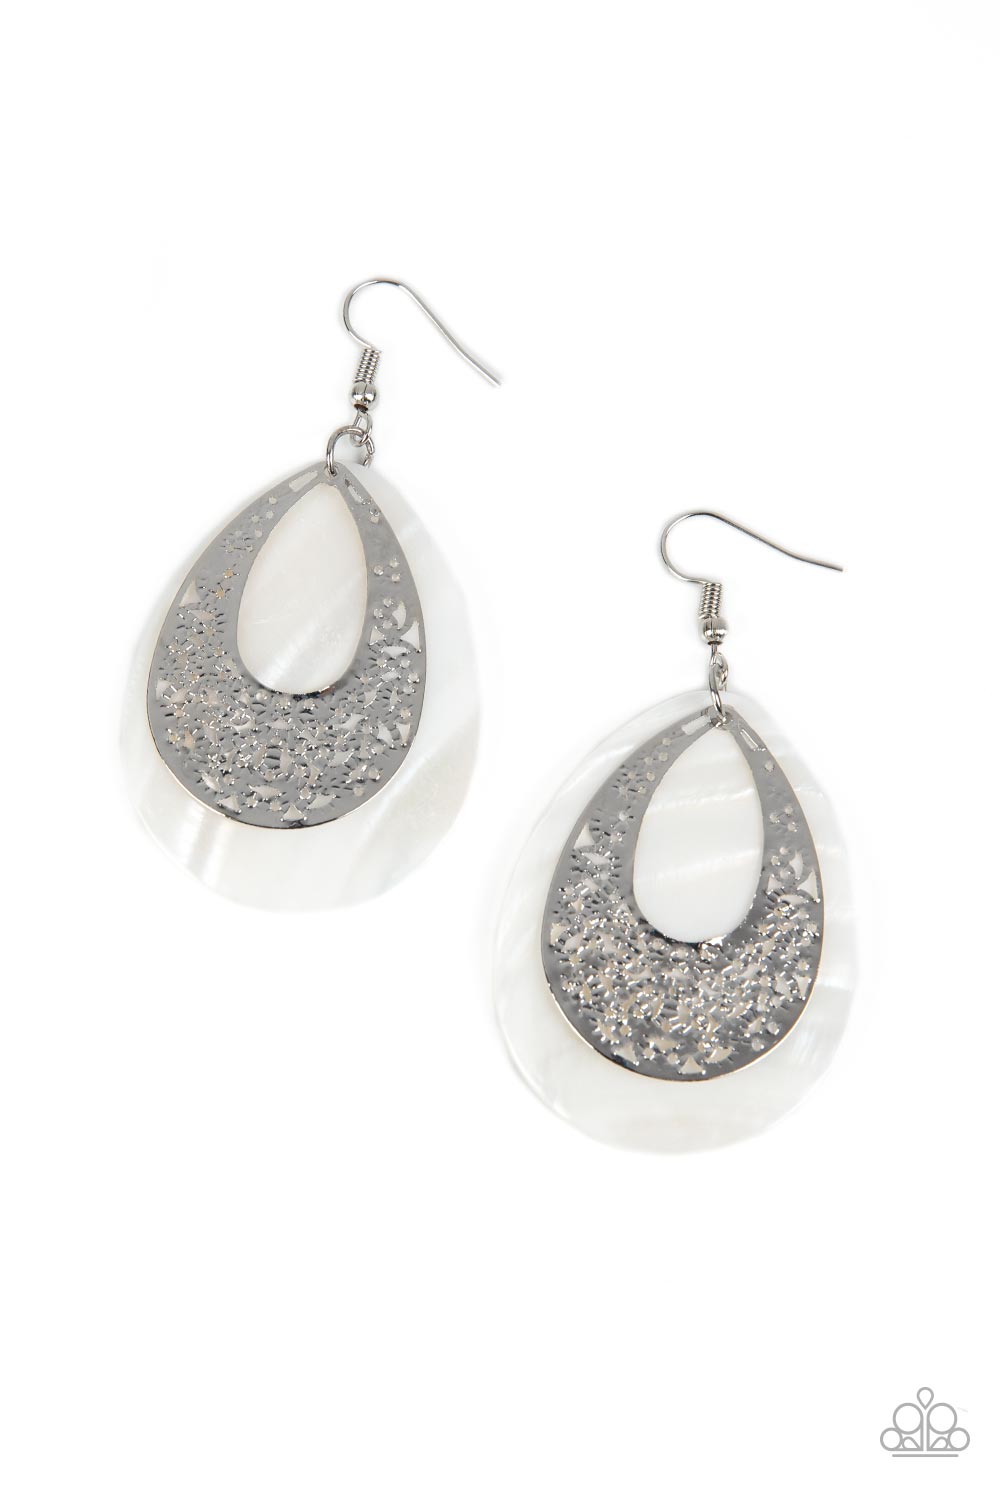 Bountiful Beaches White Earring - Paparazzi Accessories  A hammered silver teardrop that is stenciled in an abstract pattern delicately overlaps with a white shell-like teardrop, creating a whimsical lure as it swings from the ear. Earring attaches to a standard fishhook fitting.  Sold as one pair of earrings.